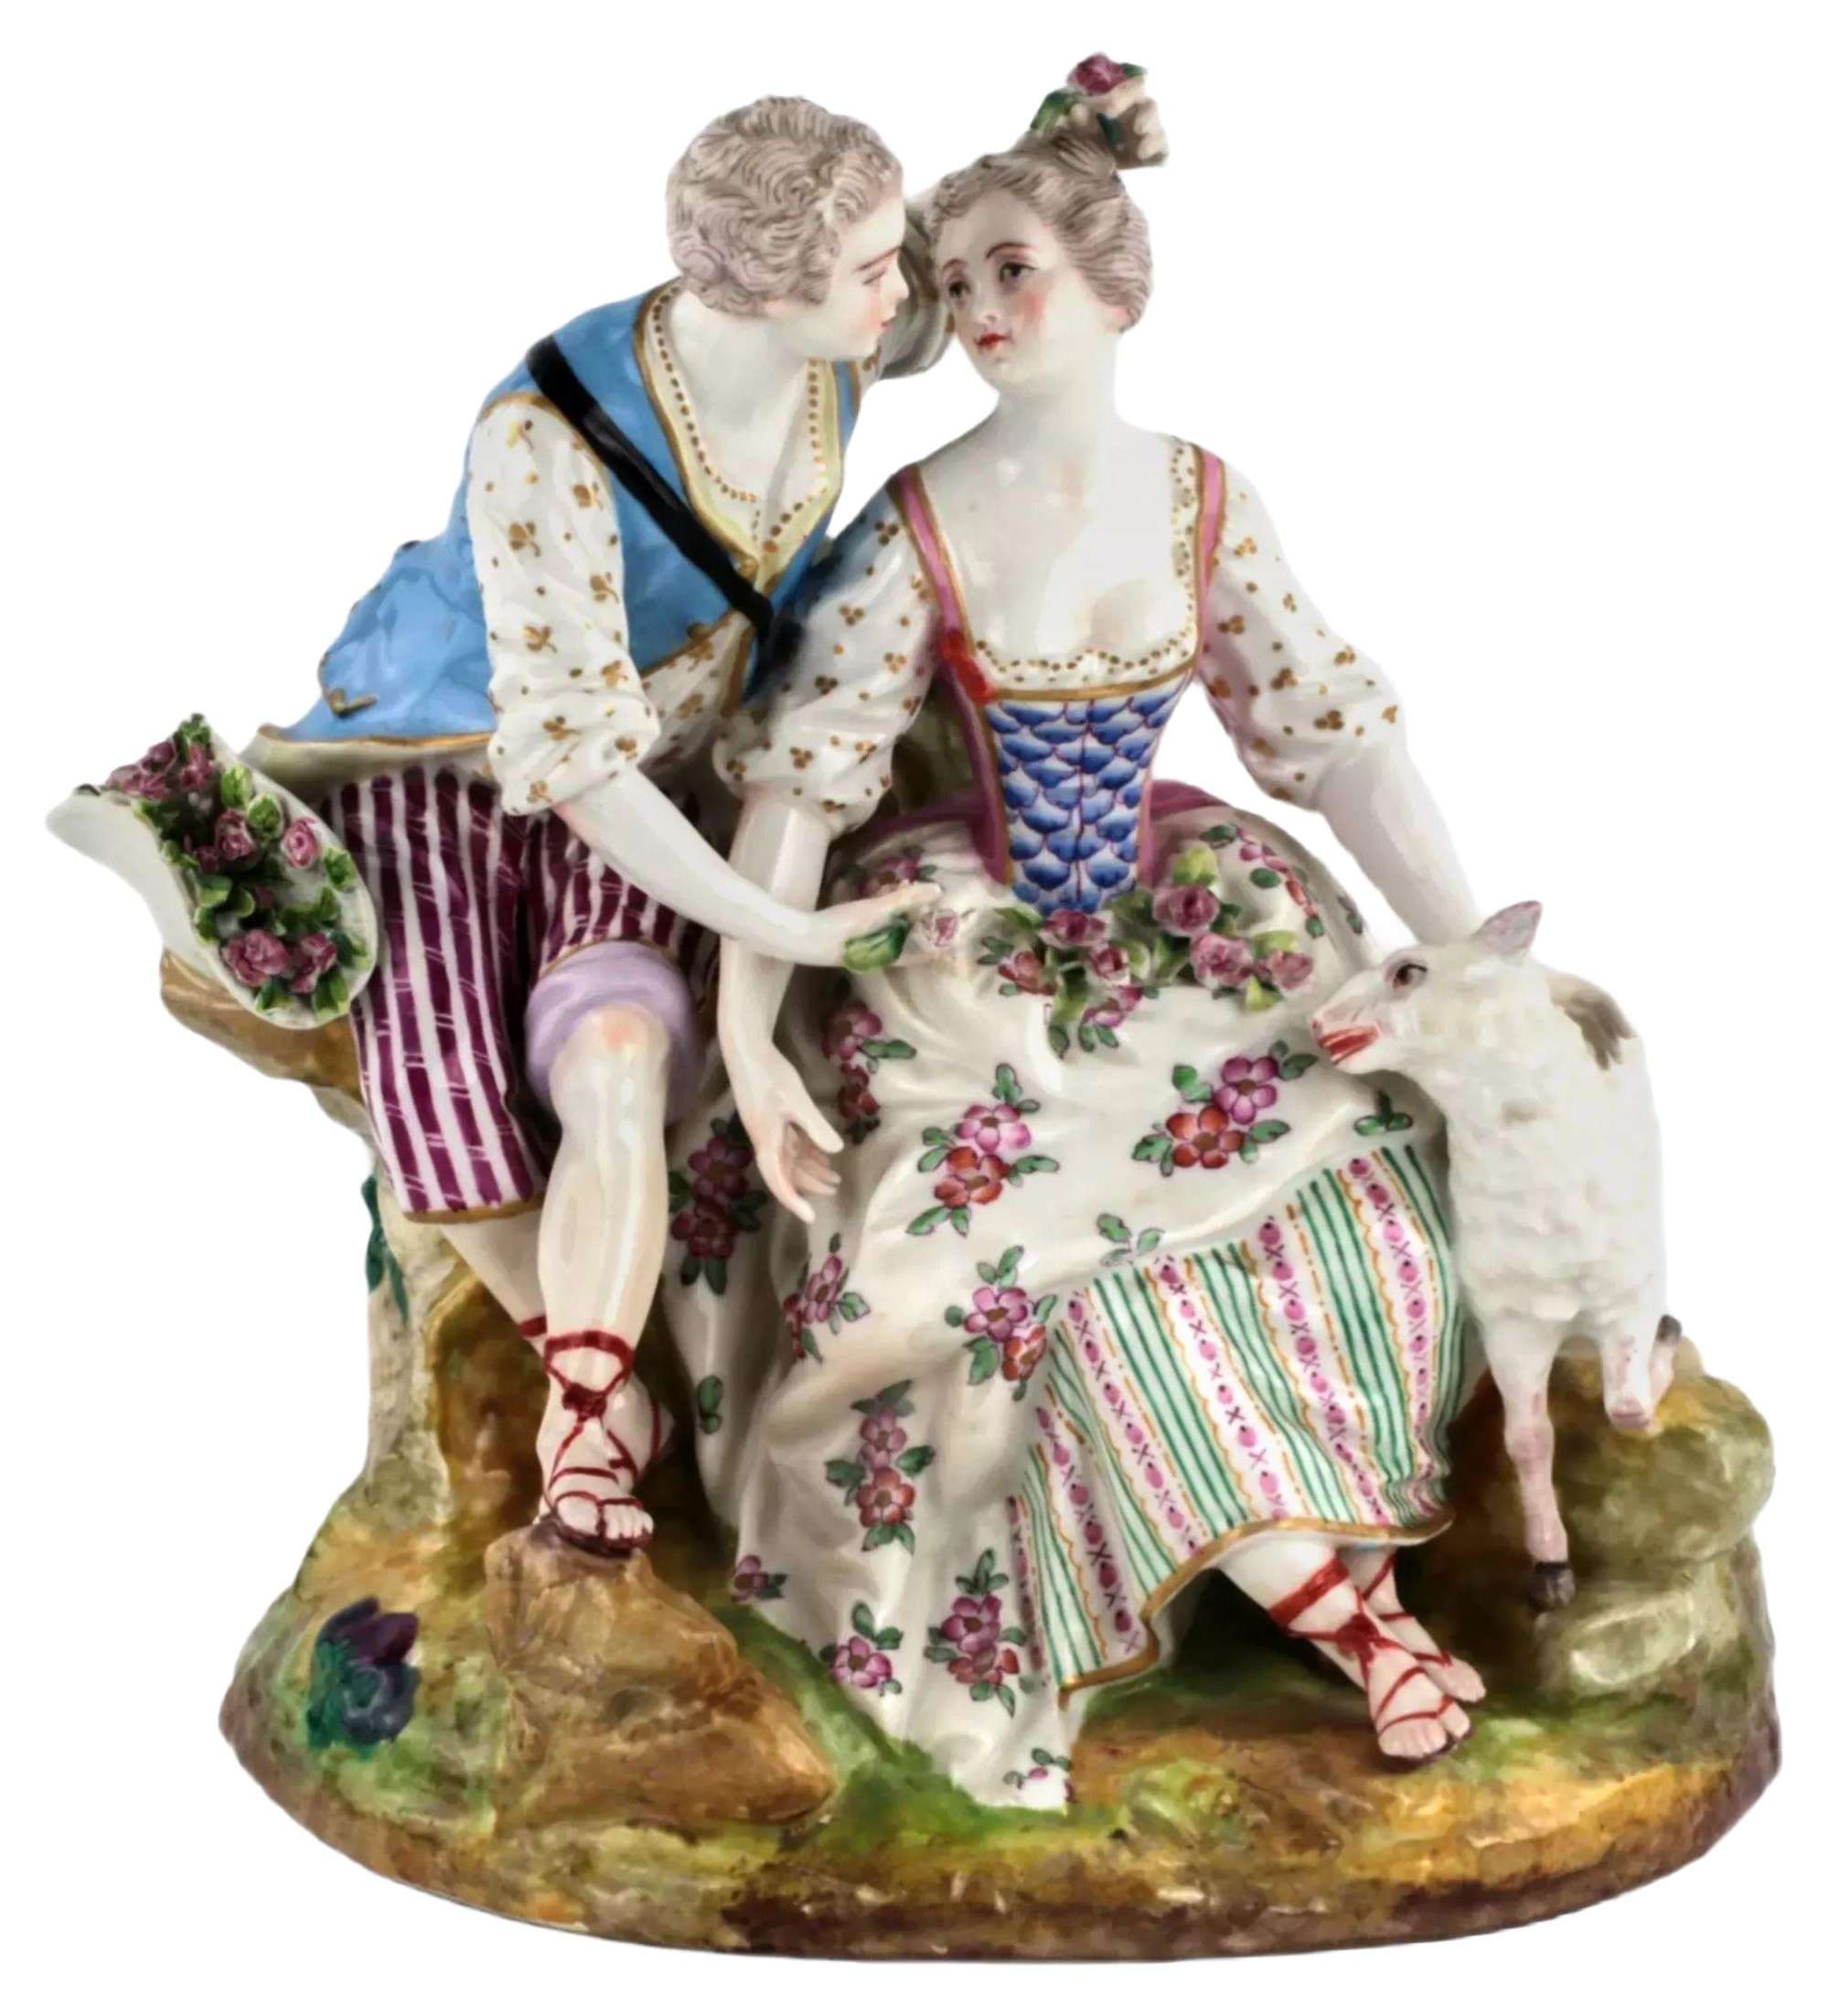 Porcelain Composition Couple in Love from Meissen